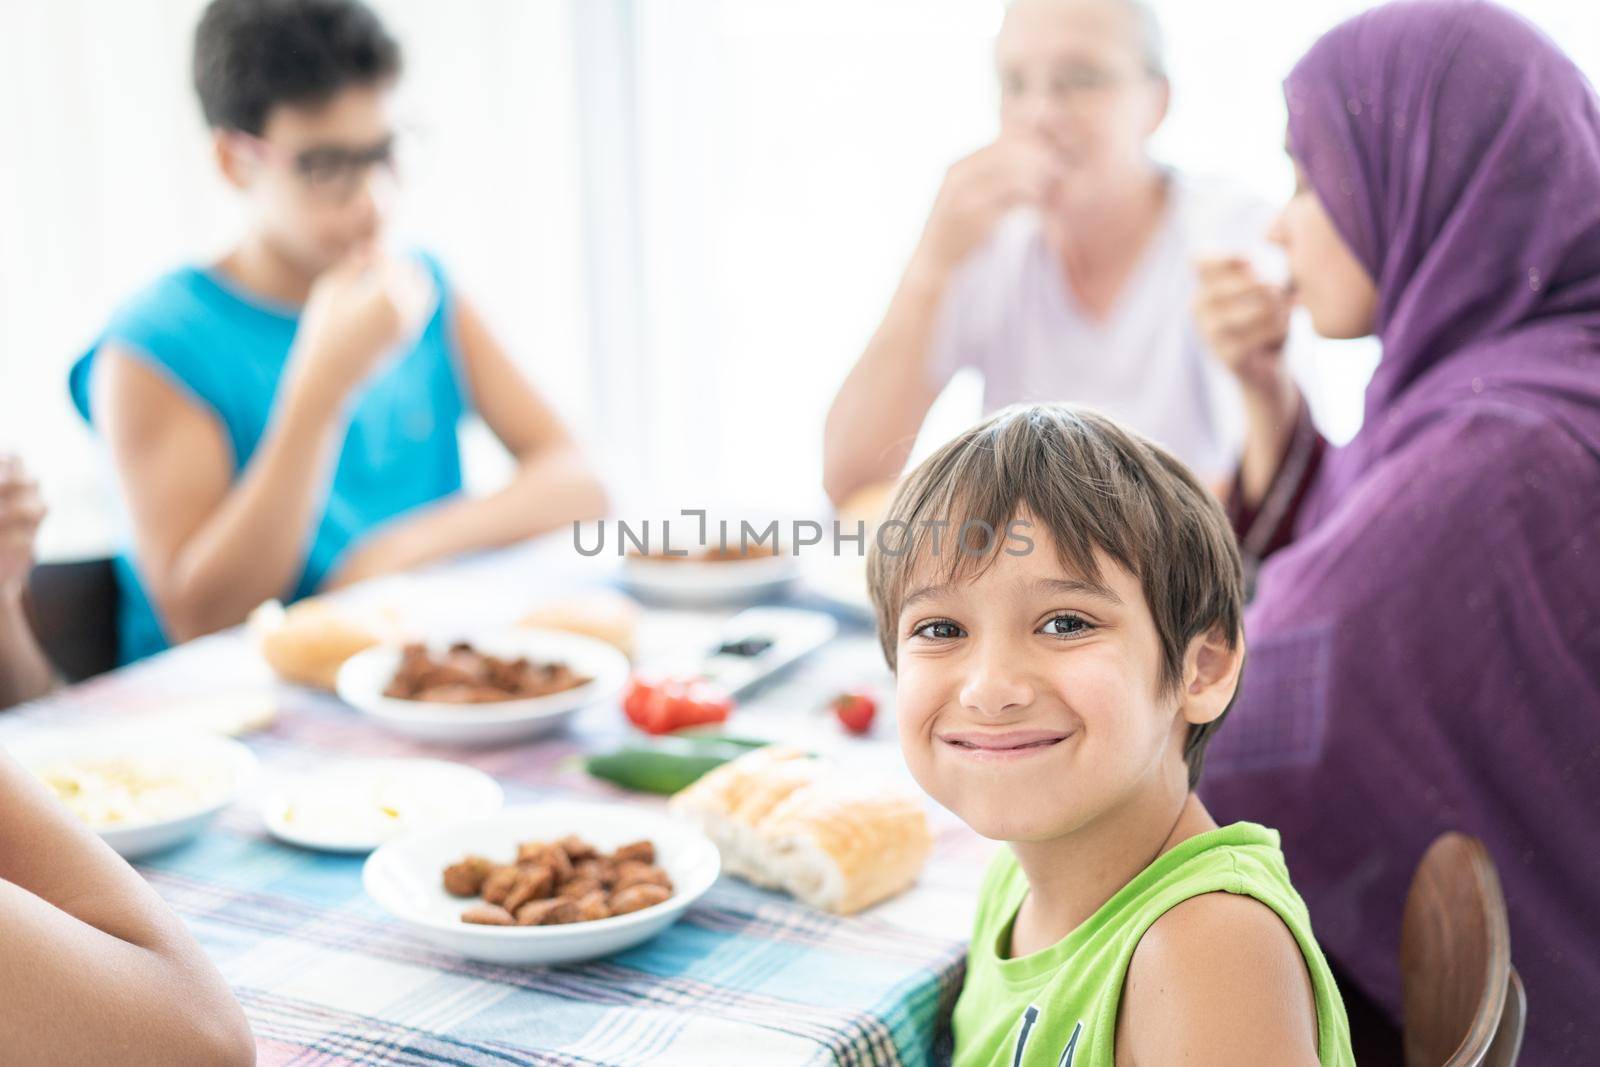 Happy family enjoying eating food in dining room together by Zurijeta